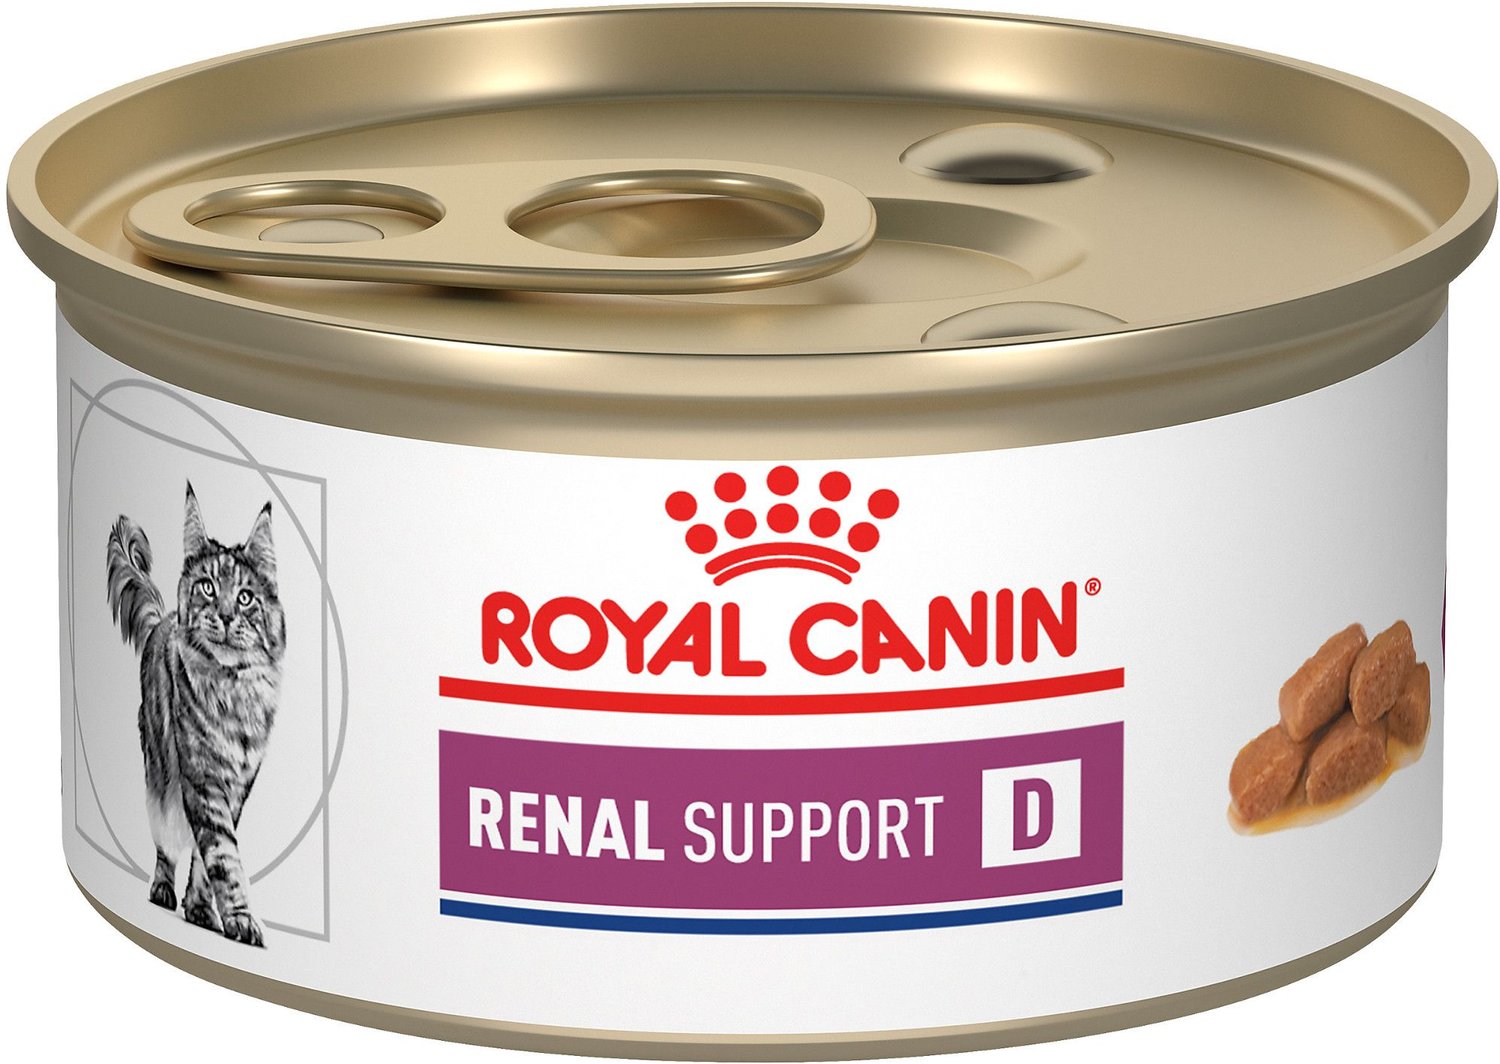 ROYAL CANIN VETERINARY DIET Adult Renal Support D Thin in Gravy Canned Cat Food, 3-oz, case of 24 - Chewy.com